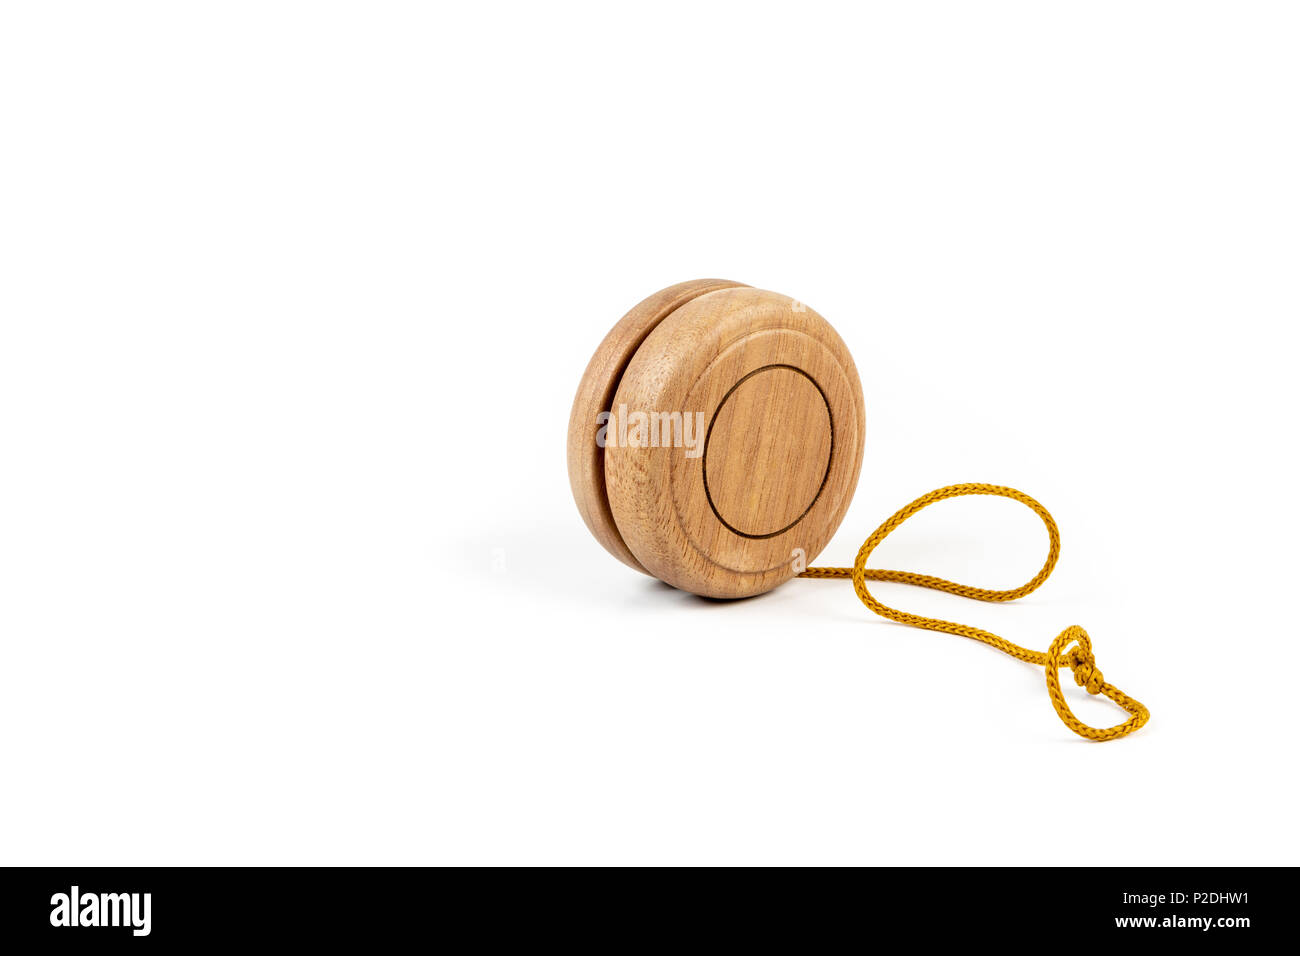 Close up of a wooden yo-yo with yellow string on white background. Stock Photo